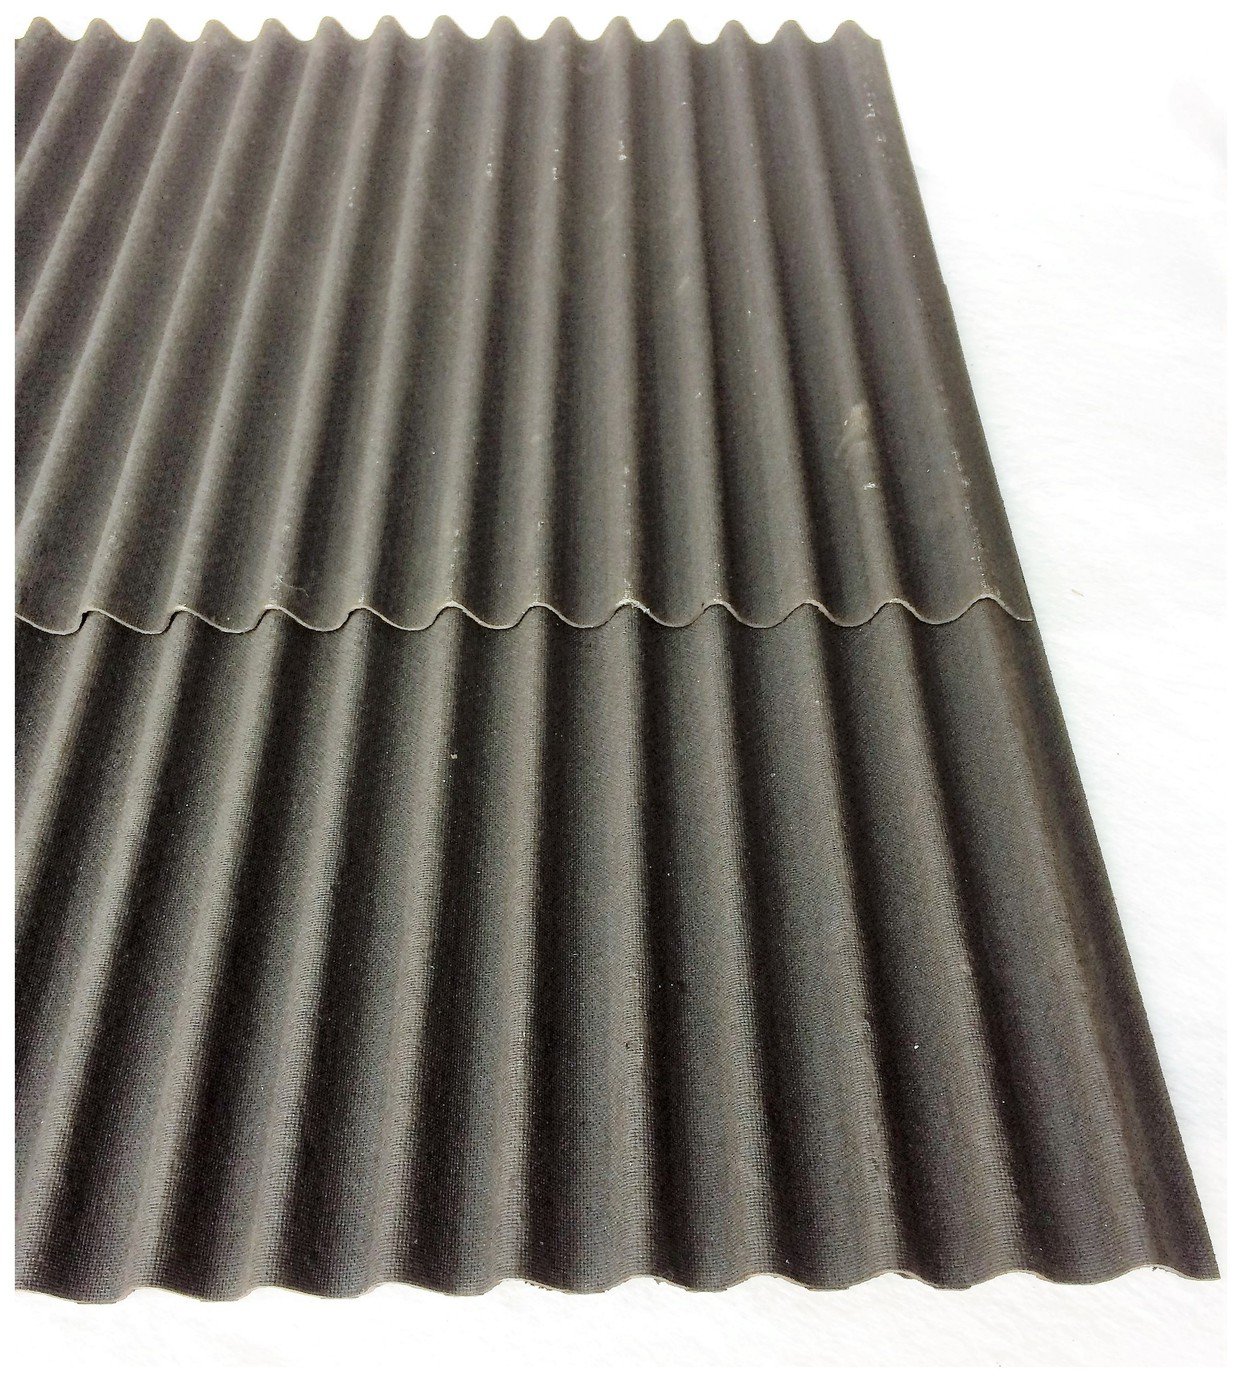 Watershed Bituminous Roofing Kit - 8 x 10ft